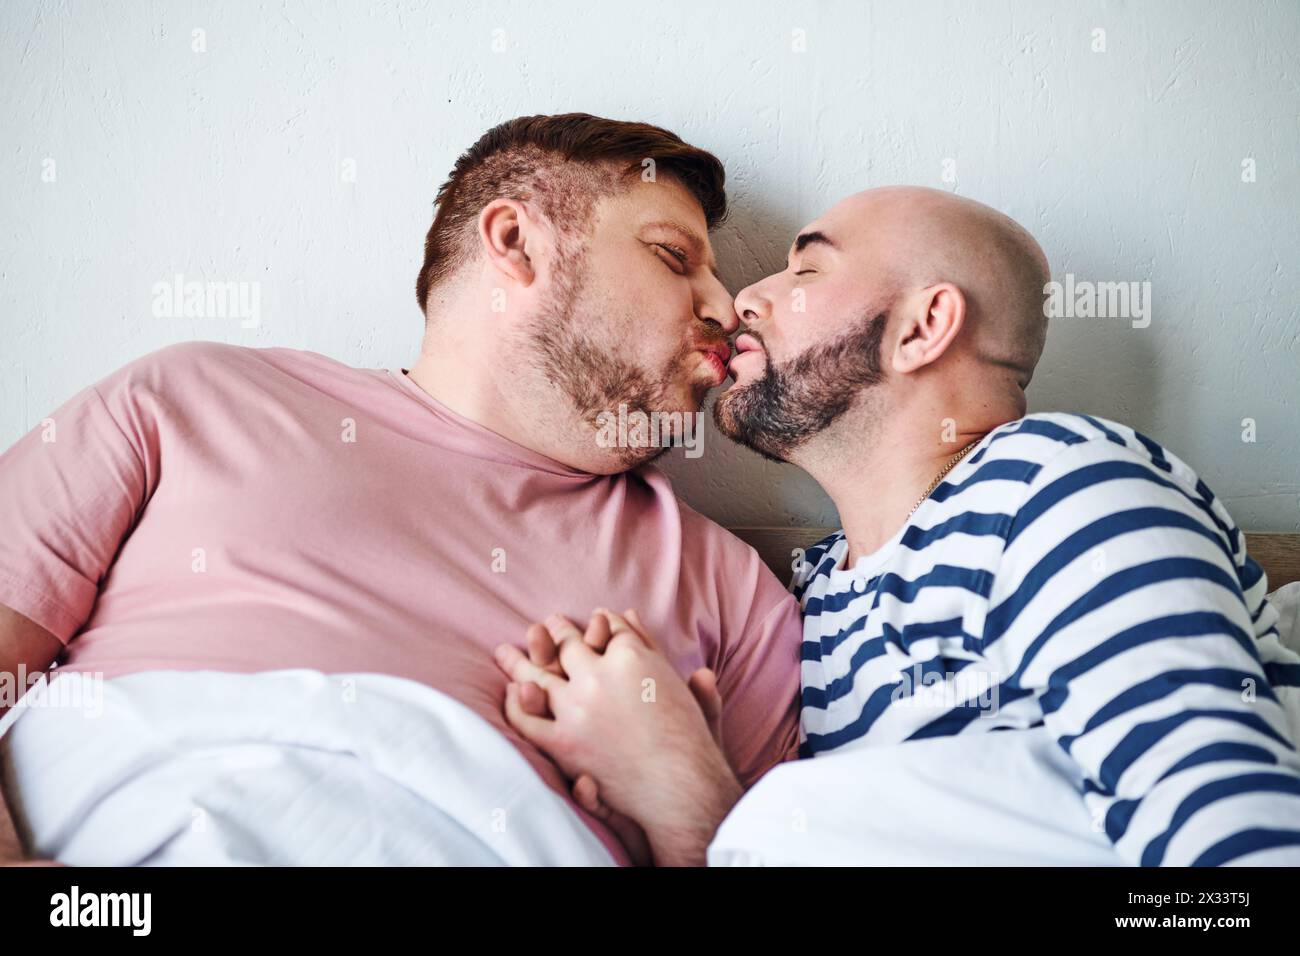 A couple of men lying in bed sharing a tender kiss. Stock Photo